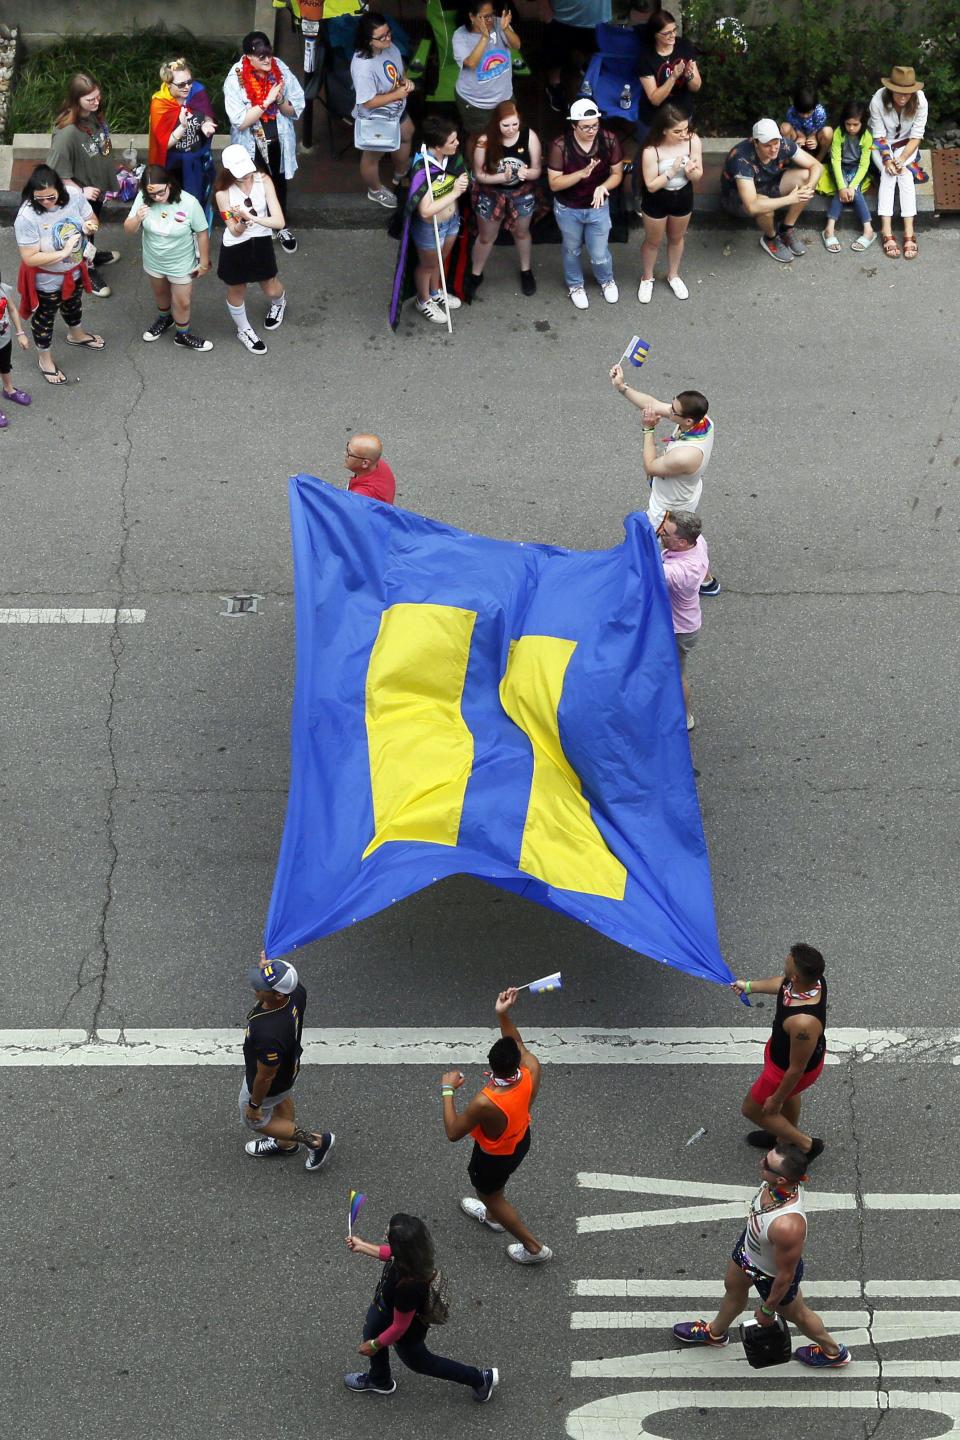 In June 2020, the Stonewall Columbus Pride Parade organization put together an LGBTQ Unity March for Black Lives in Columbus, Ohio, to express solidarity with the Black community after the previous month's murder of George Floyd by Minneapolis police officer Derek Chauvin.